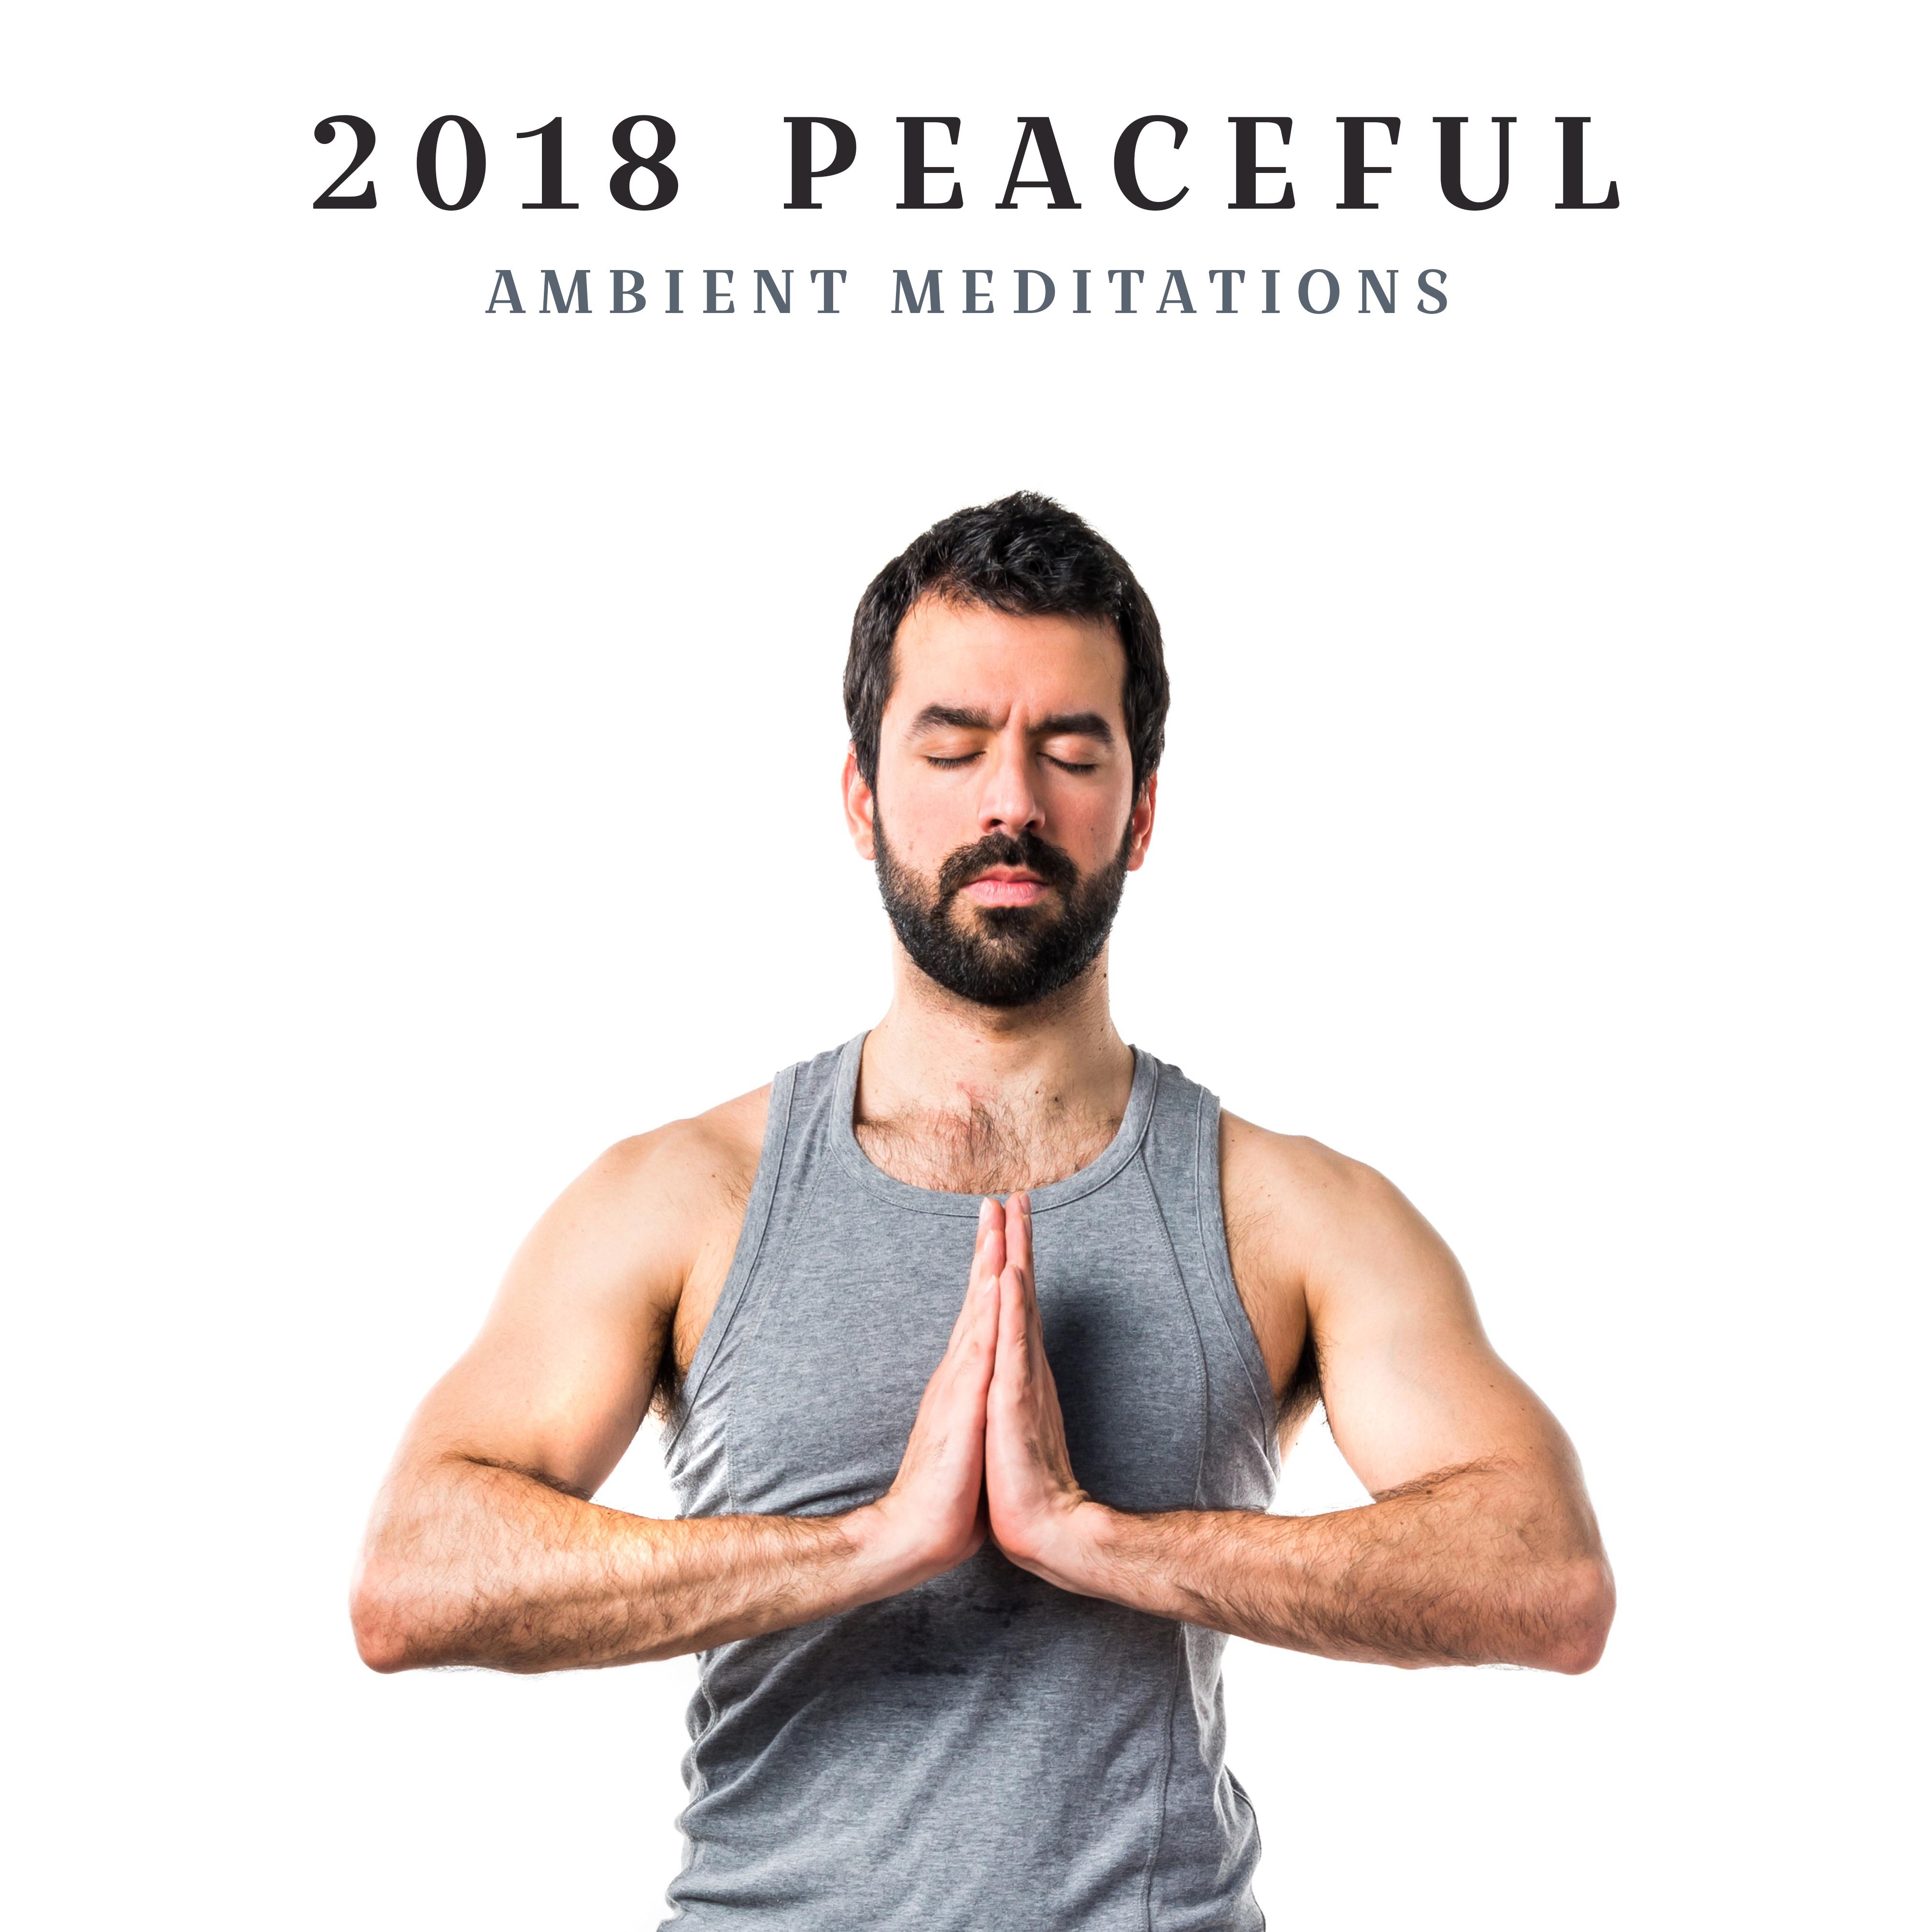 2018 Peaceful Ambient Meditations